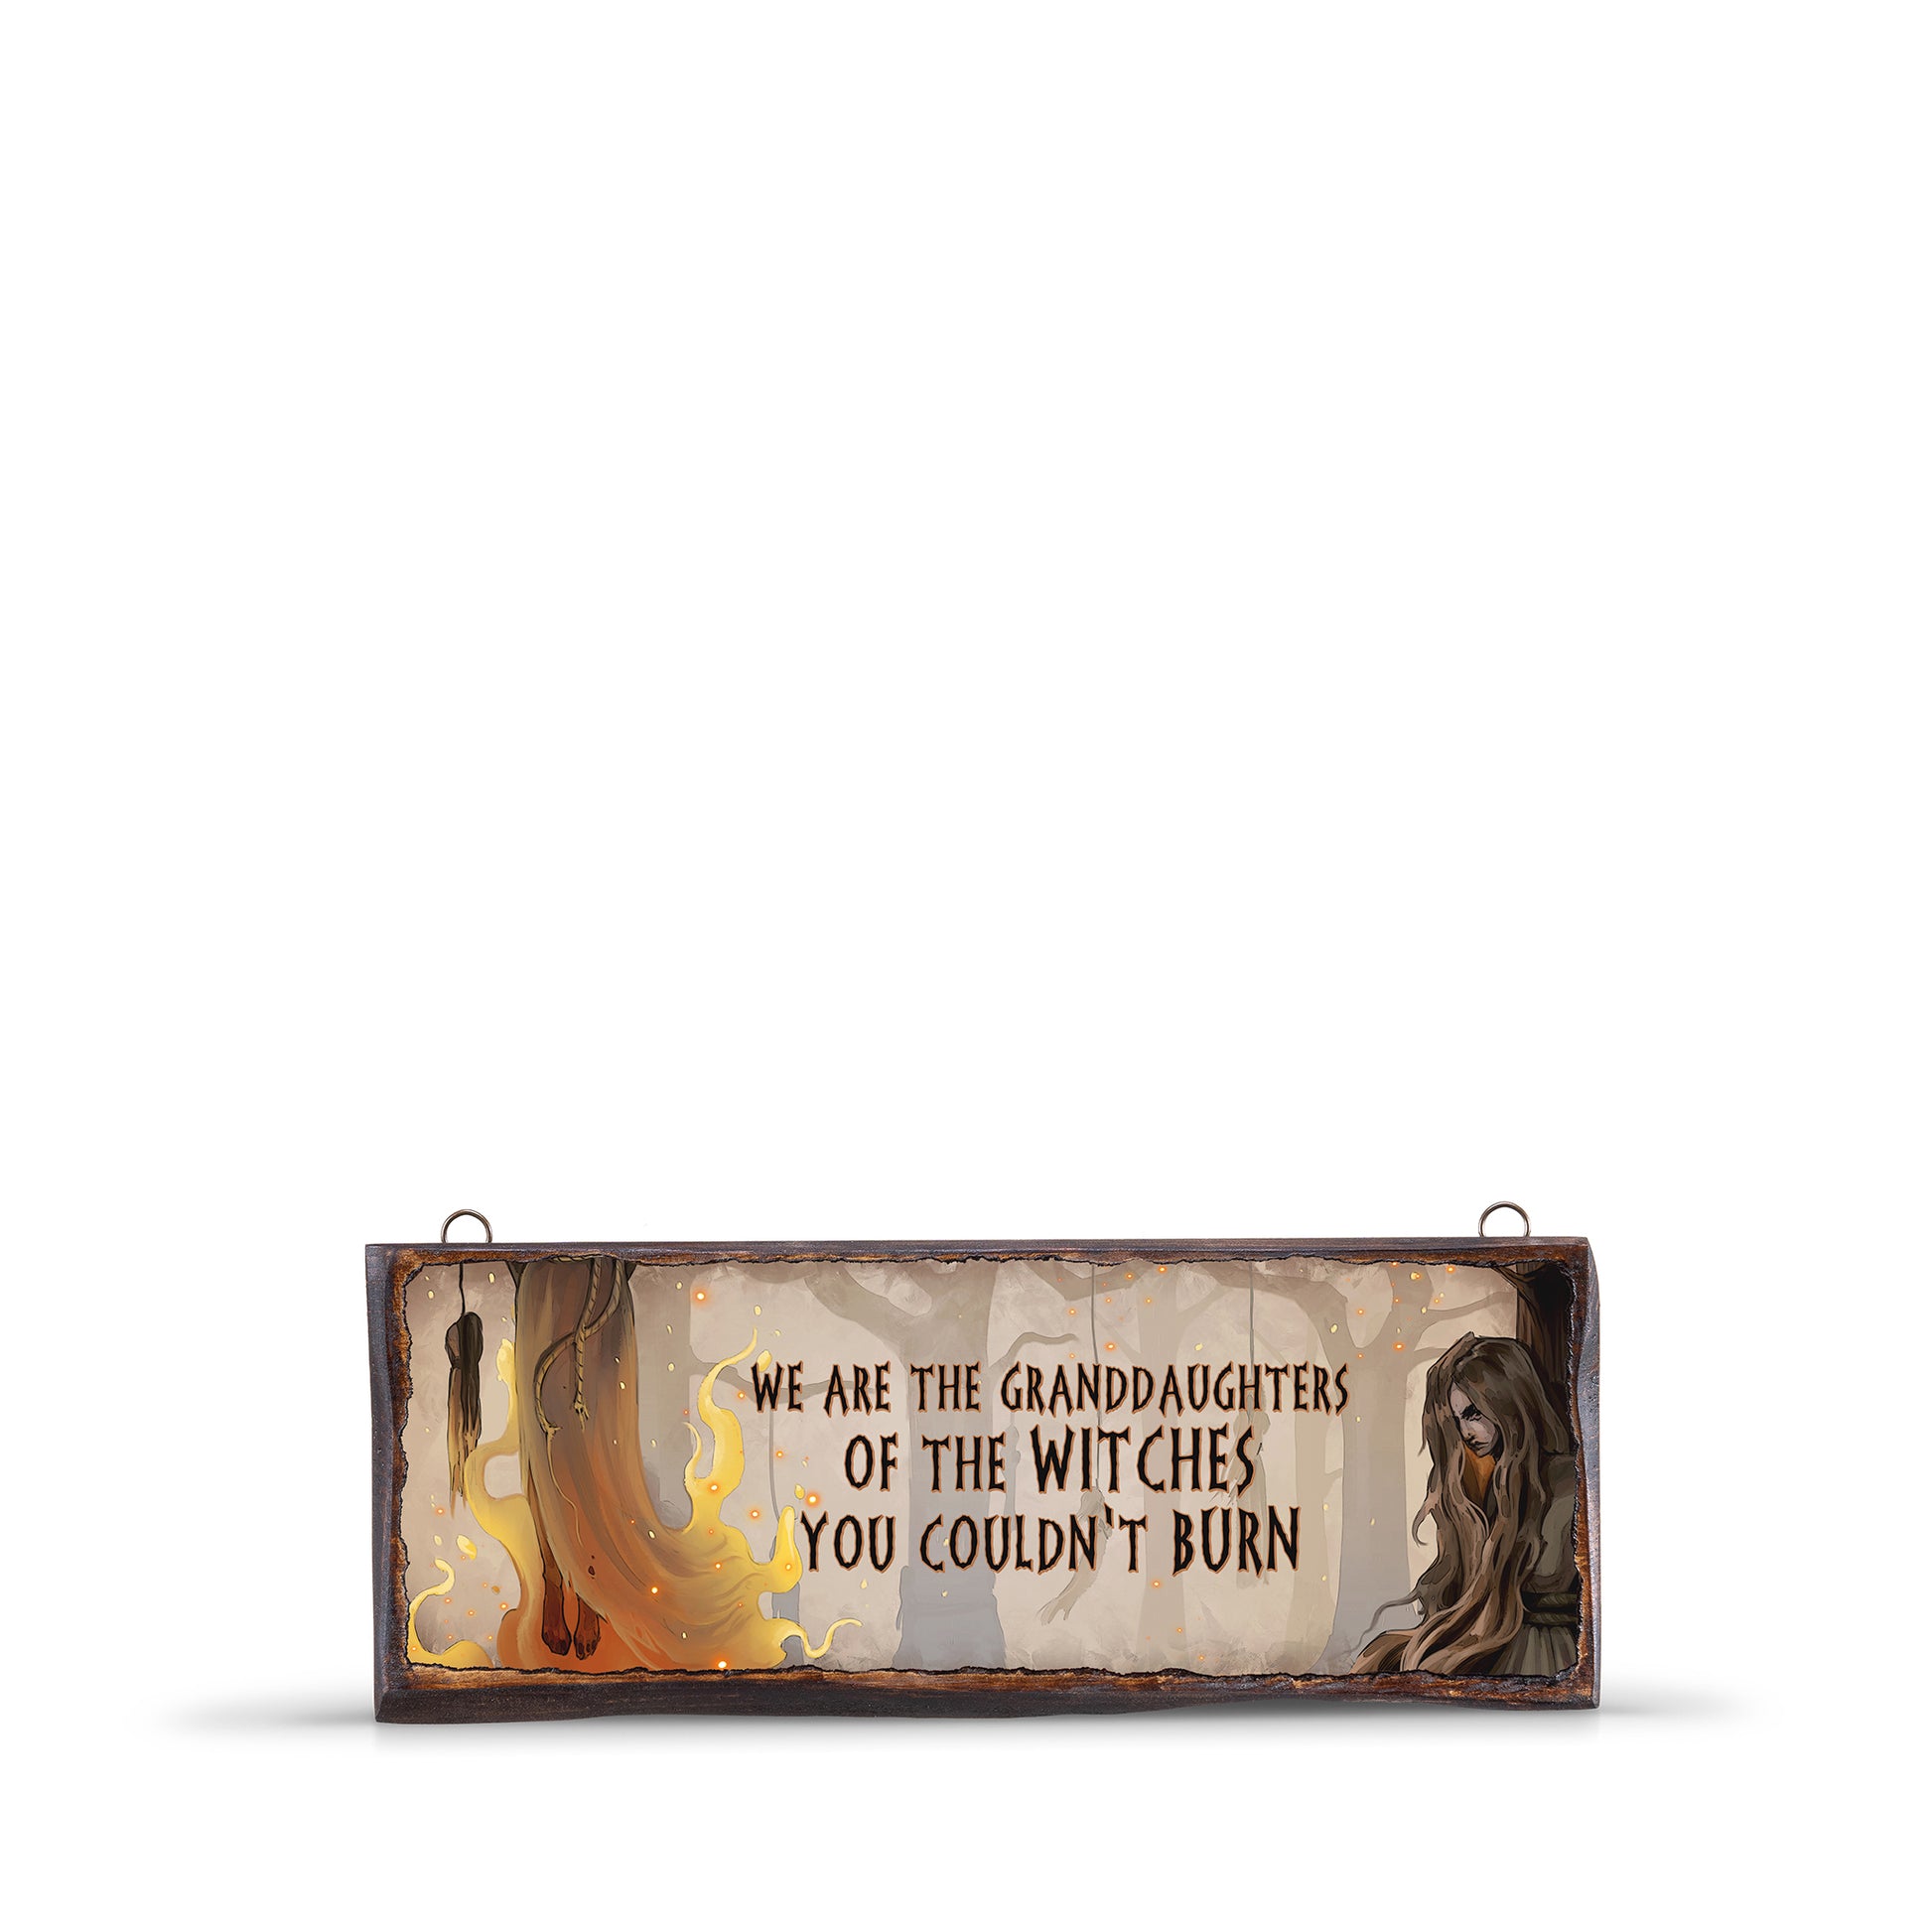 WE ARE THE GRANDDAUGHTERS OF THE WITCHES YOU COULDN'T BURN WOODEN SIGN - WS003 - Apnoia